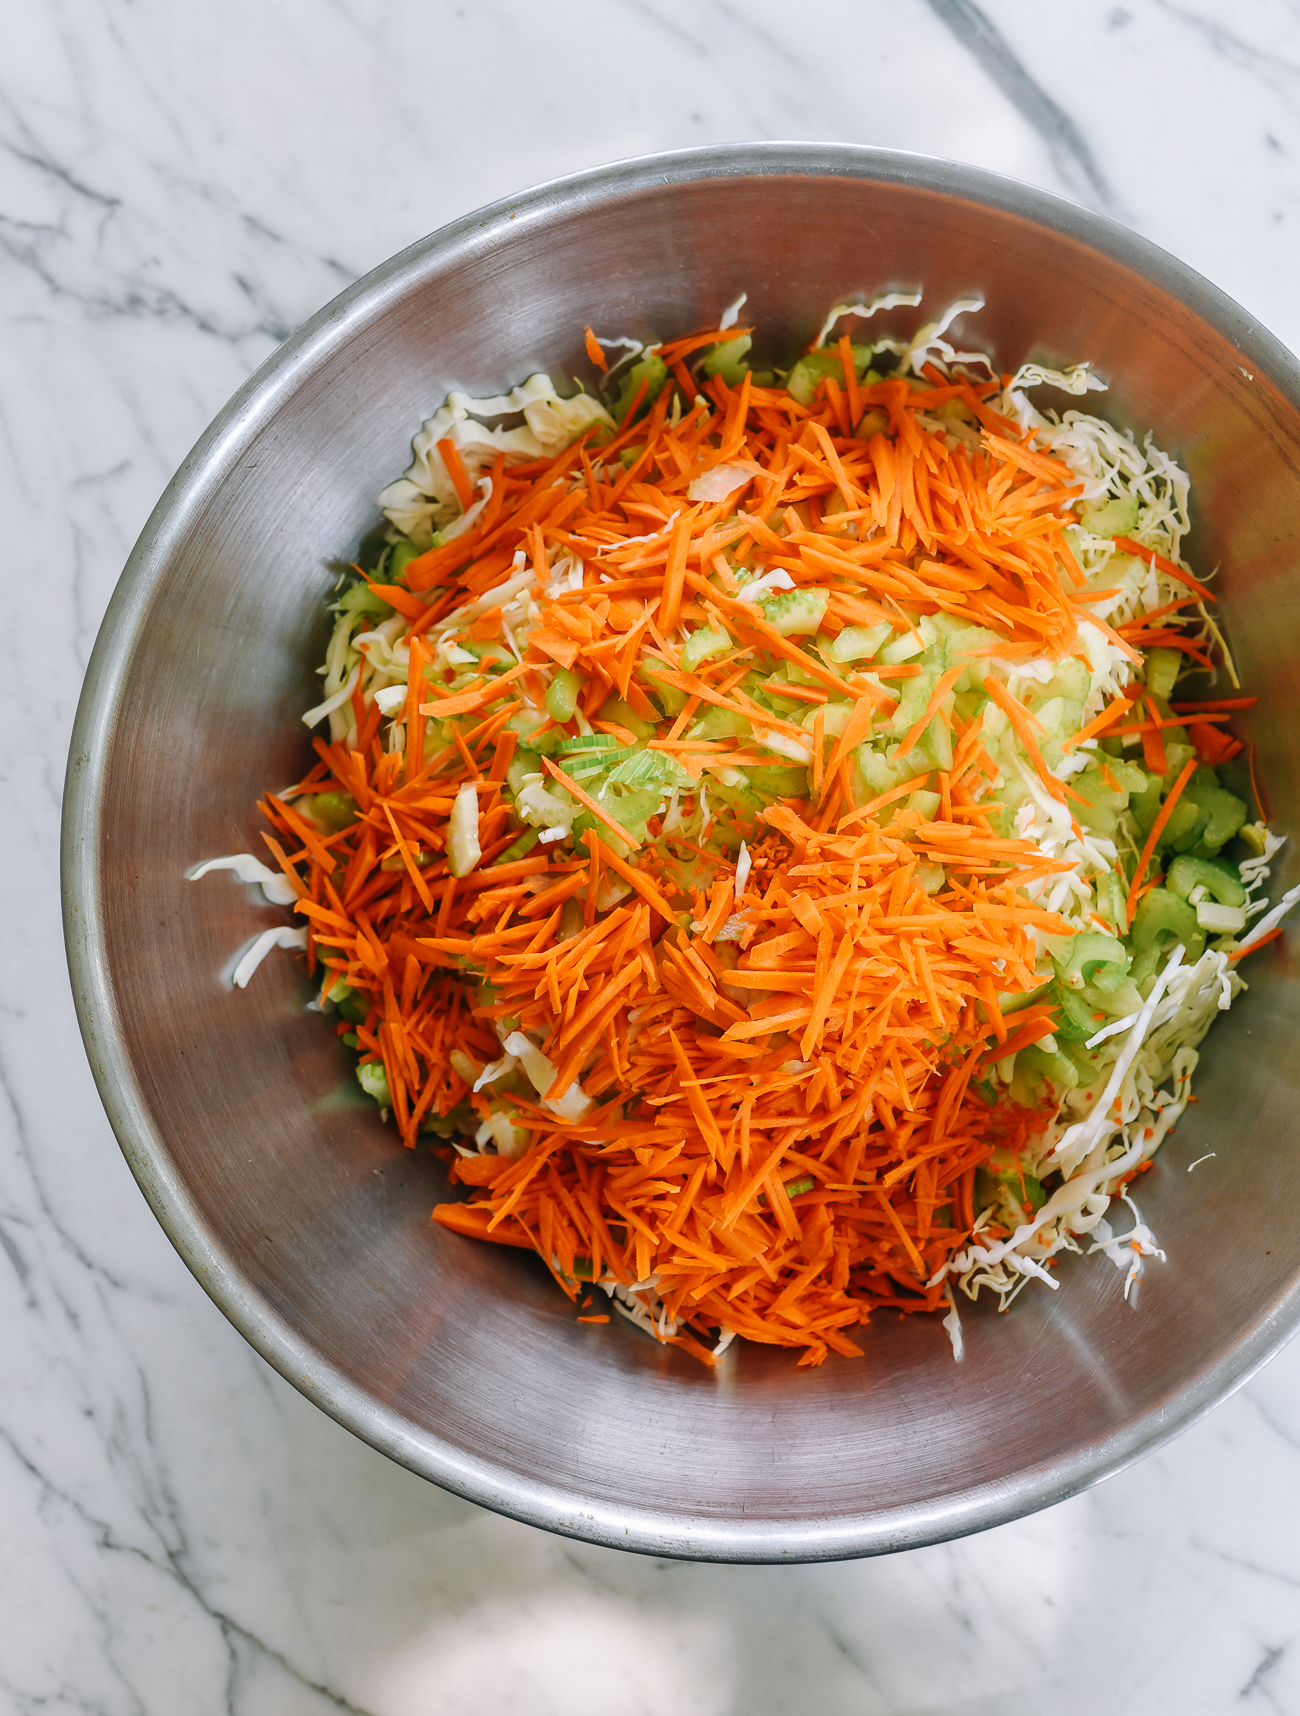 shredded cabbage, carrots, and celery in large metal bowl